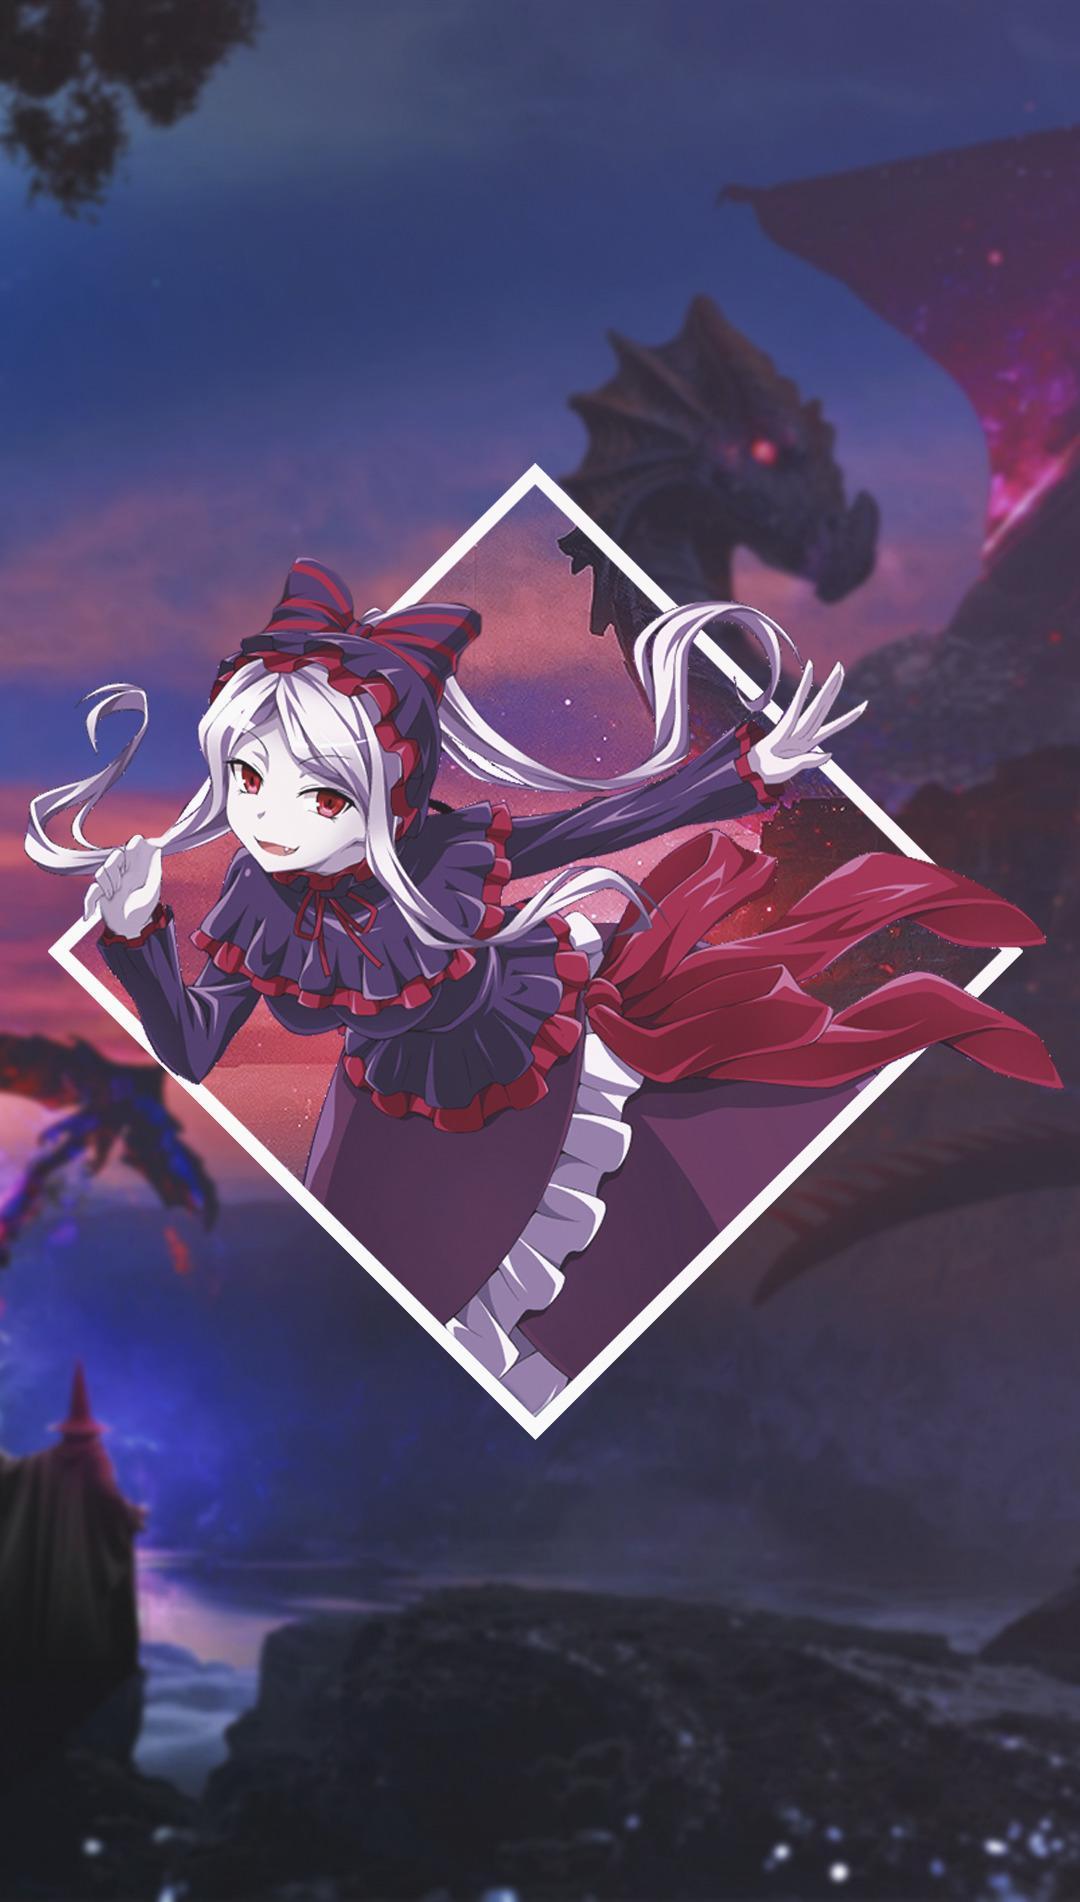 HD wallpaper, Anime Girls, Shalltear Bloodfallen, Picture In Picture, Anime, Overlord Anime